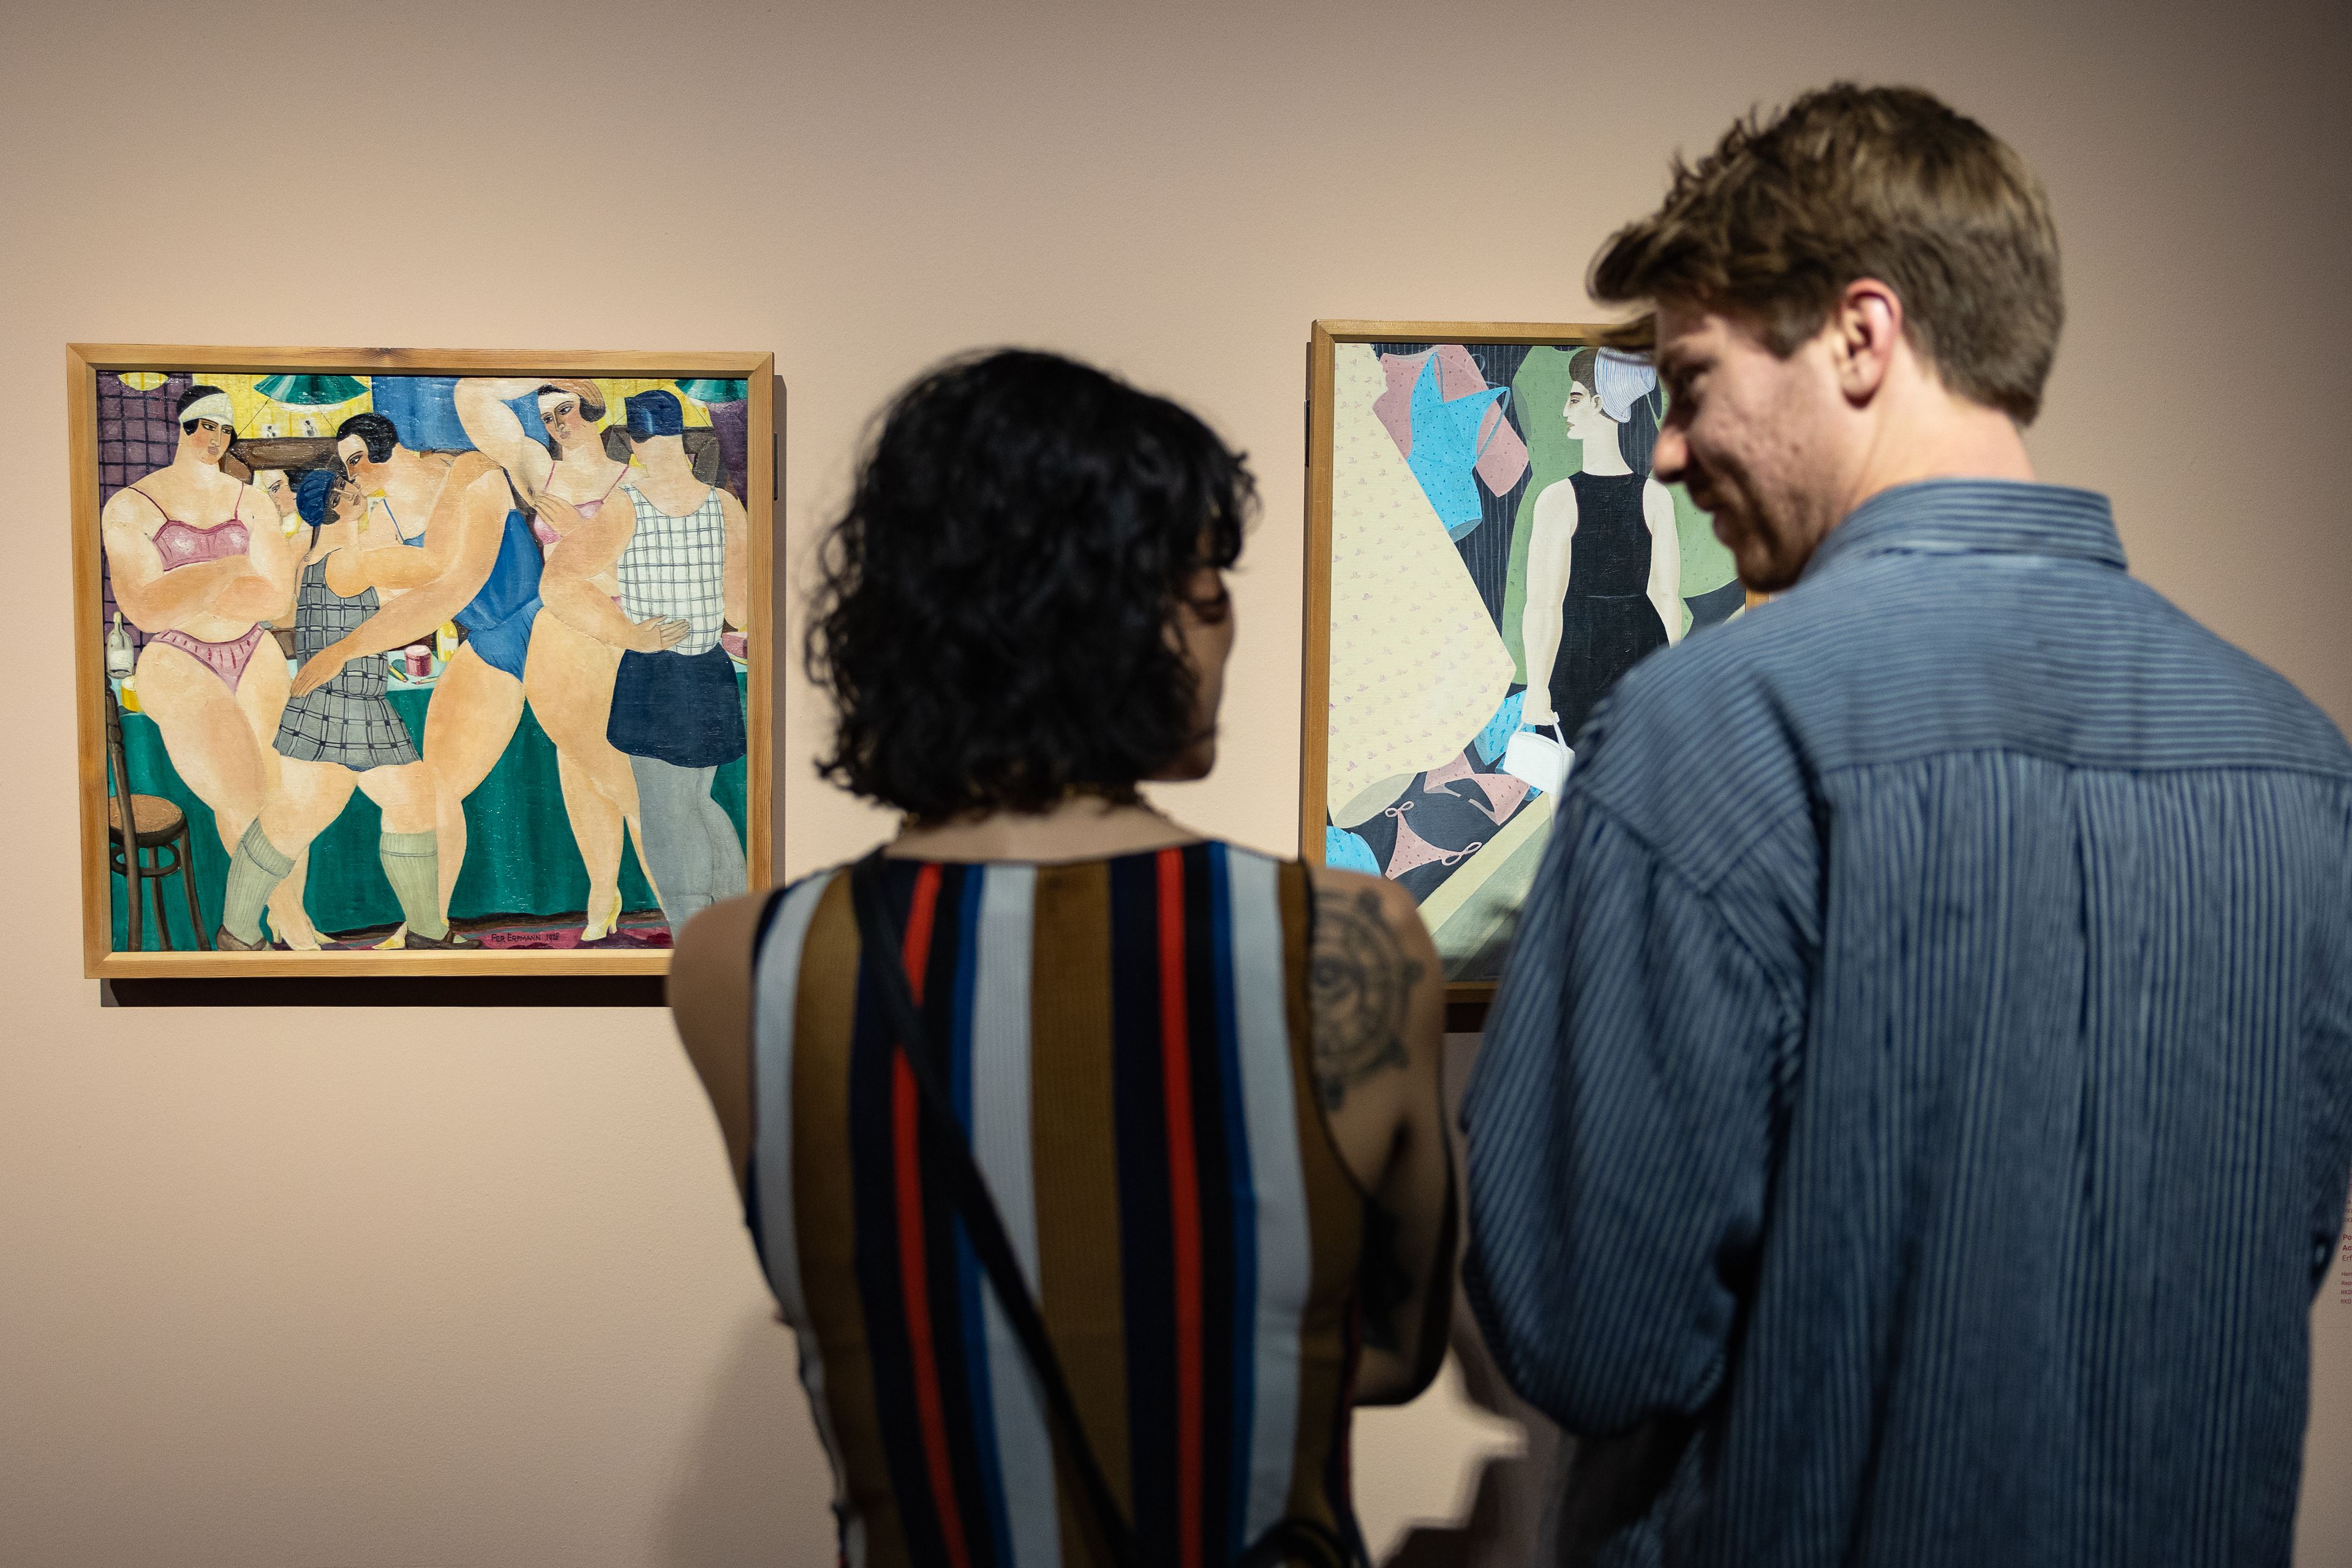 Visitors looking at the work of art by Ferdinand Erfmann when visiting ‘The Art of Drag’ exhibition at the Frans Hals Museum, Location HAL.